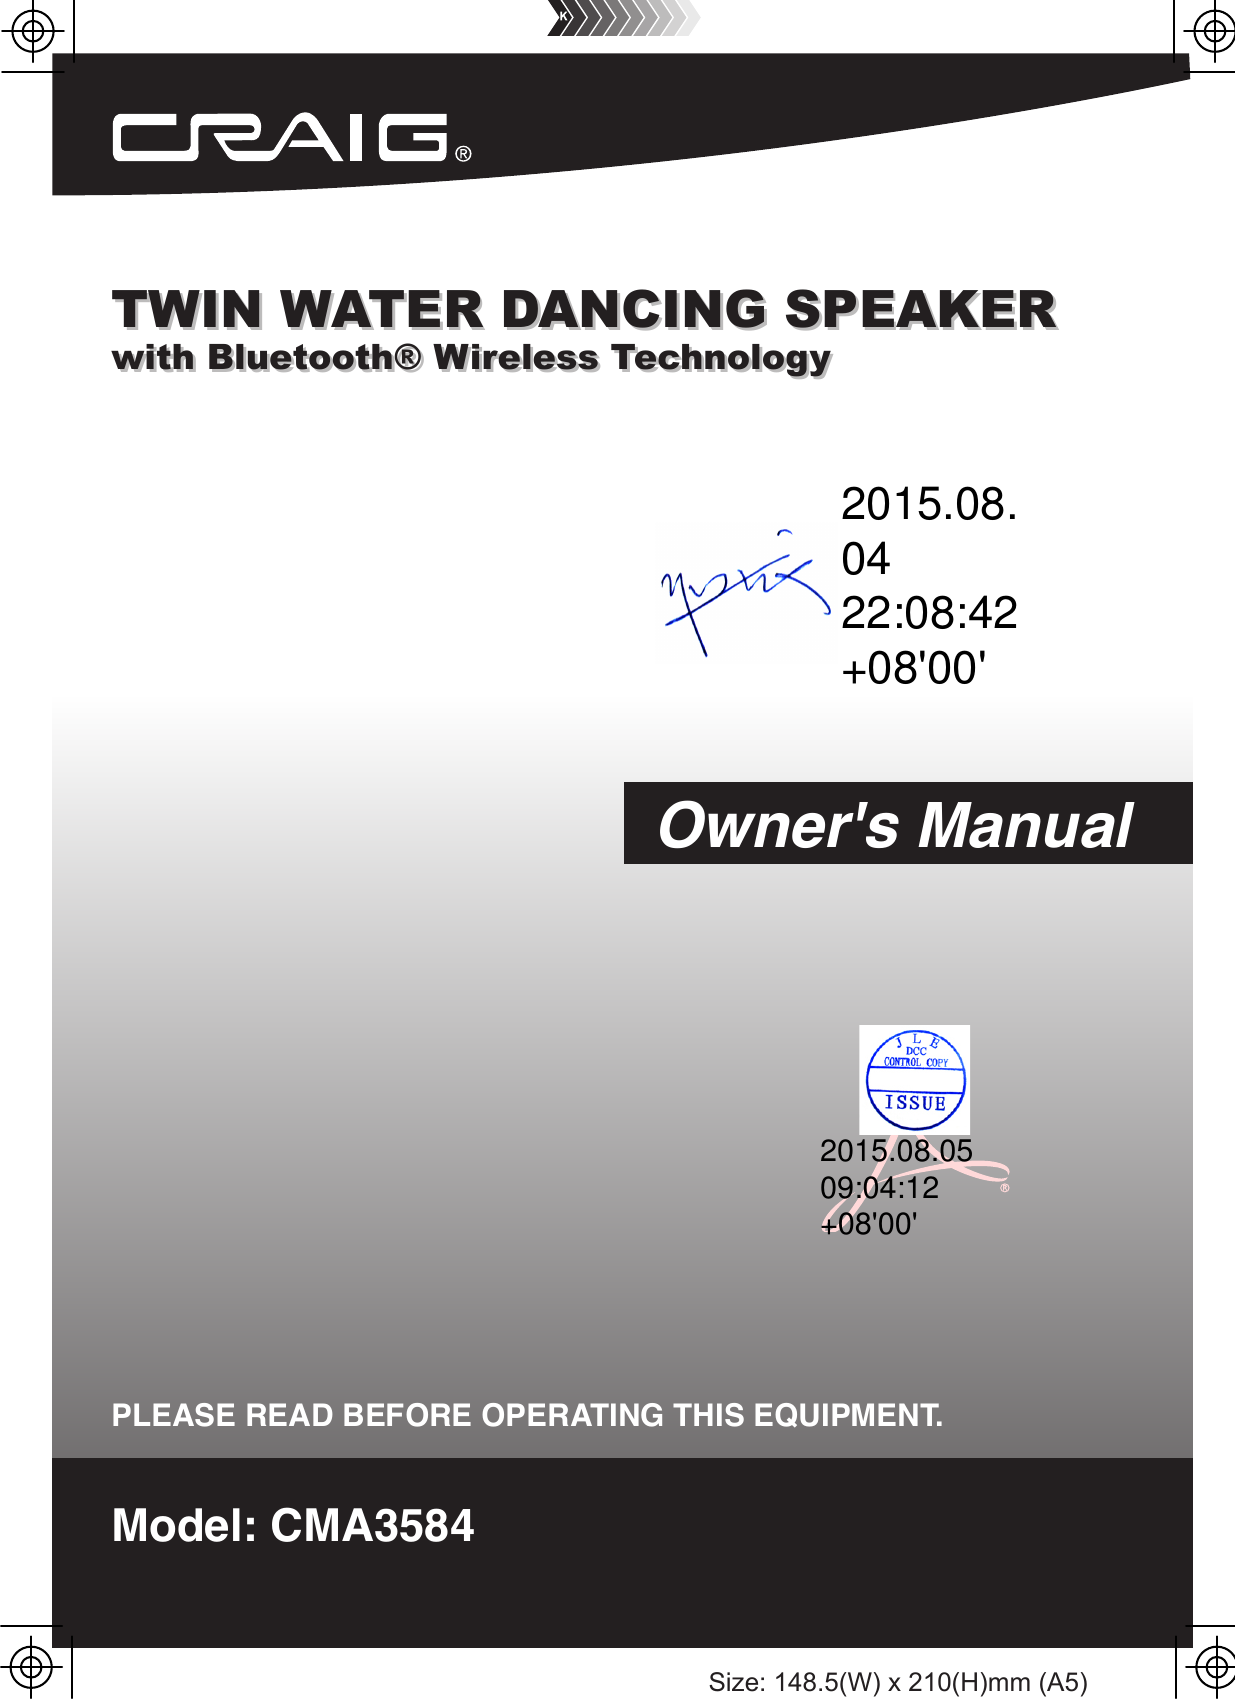 TWIN WATER DANCING SPEAKER with Bluetooth® Wireless TechnologyTWIN WATER DANCING SPEAKER with Bluetooth® Wireless TechnologyModel: CMA3584PLEASE READ BEFORE OPERATING THIS EQUIPMENT.Owner&apos;s ManualSize: 148.5(W) x 210(H)mm (A5)2015.08.0422:08:42+08&apos;00&apos;2015.08.0509:04:12+08&apos;00&apos;